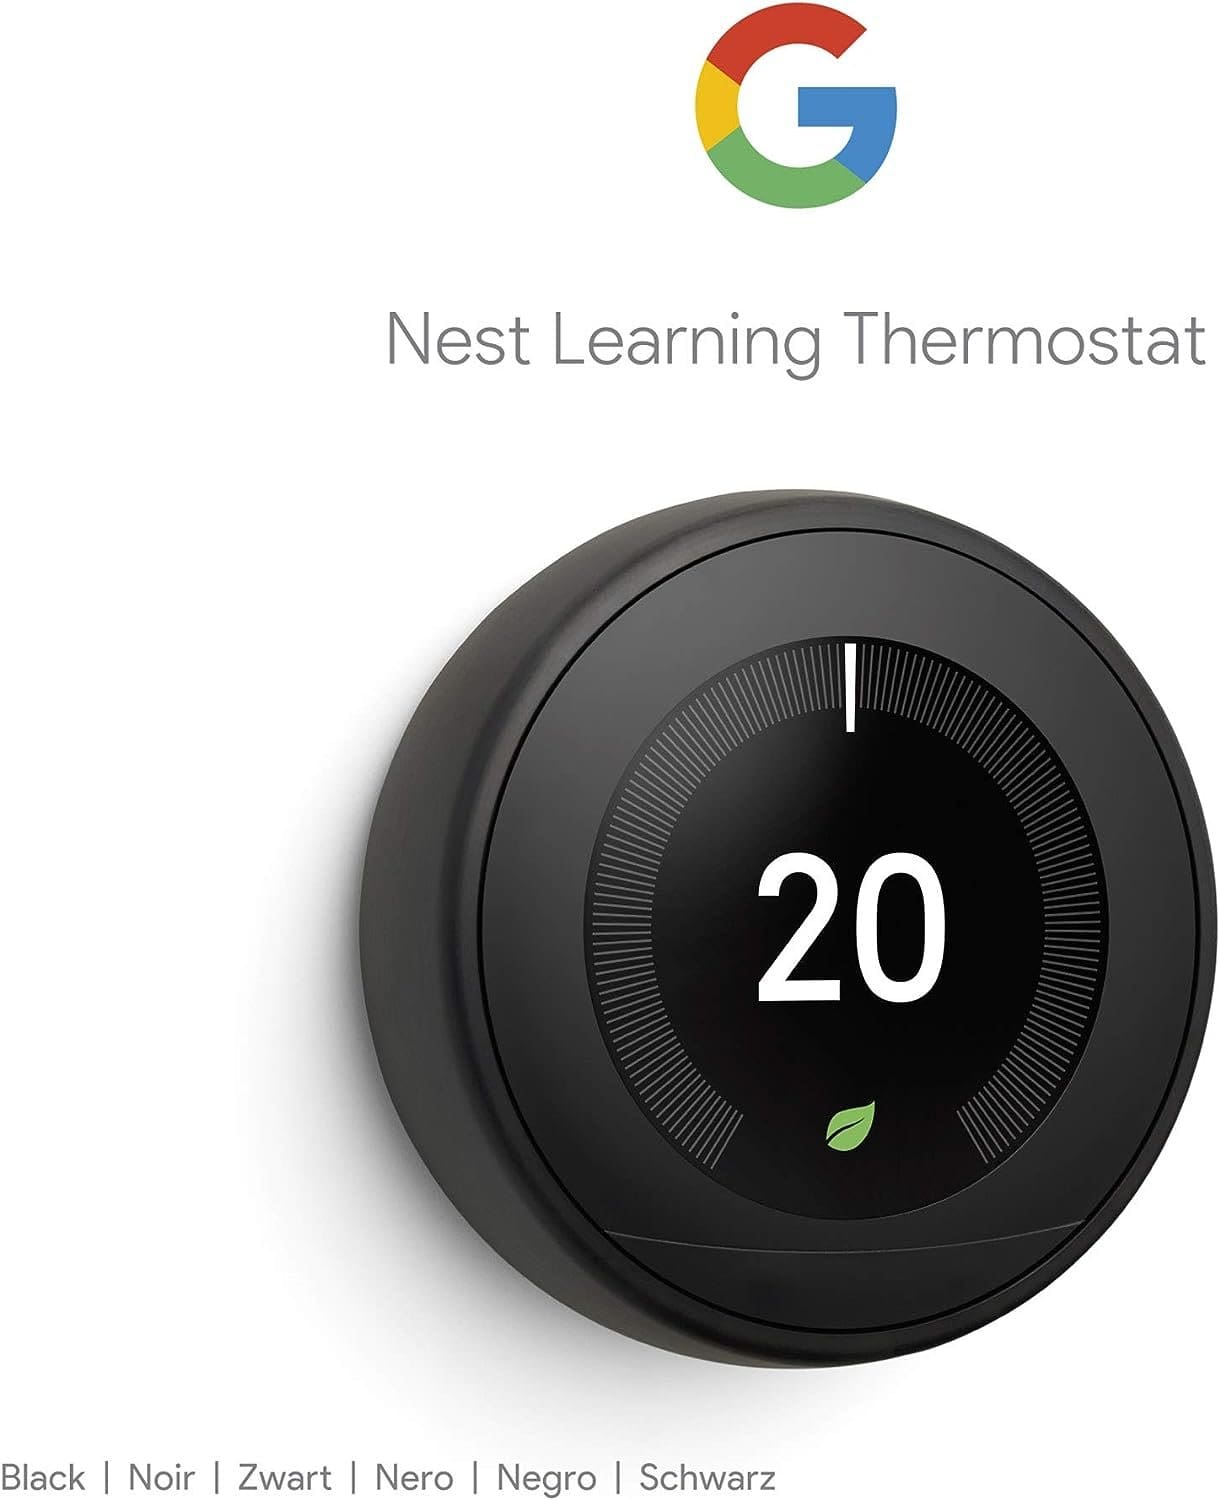 Google Nest Learning Thermostat 3rd Generation Black – Smart Thermostat Review